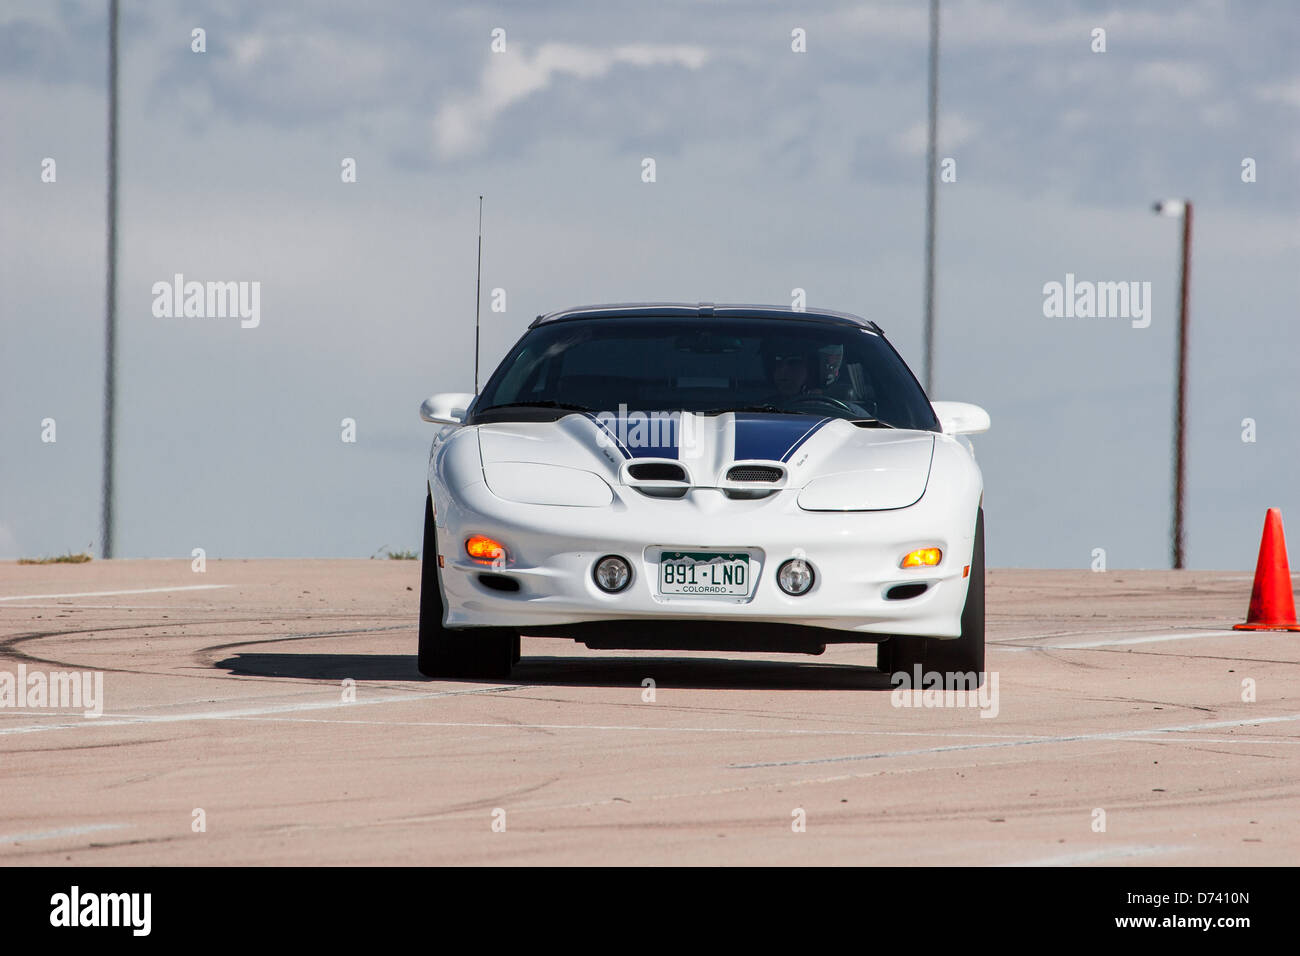 A 2001 white and blue Pontiac Trans Am automobile in an autocross race at a regional Sports Car Club of America (SCCA) event Stock Photo